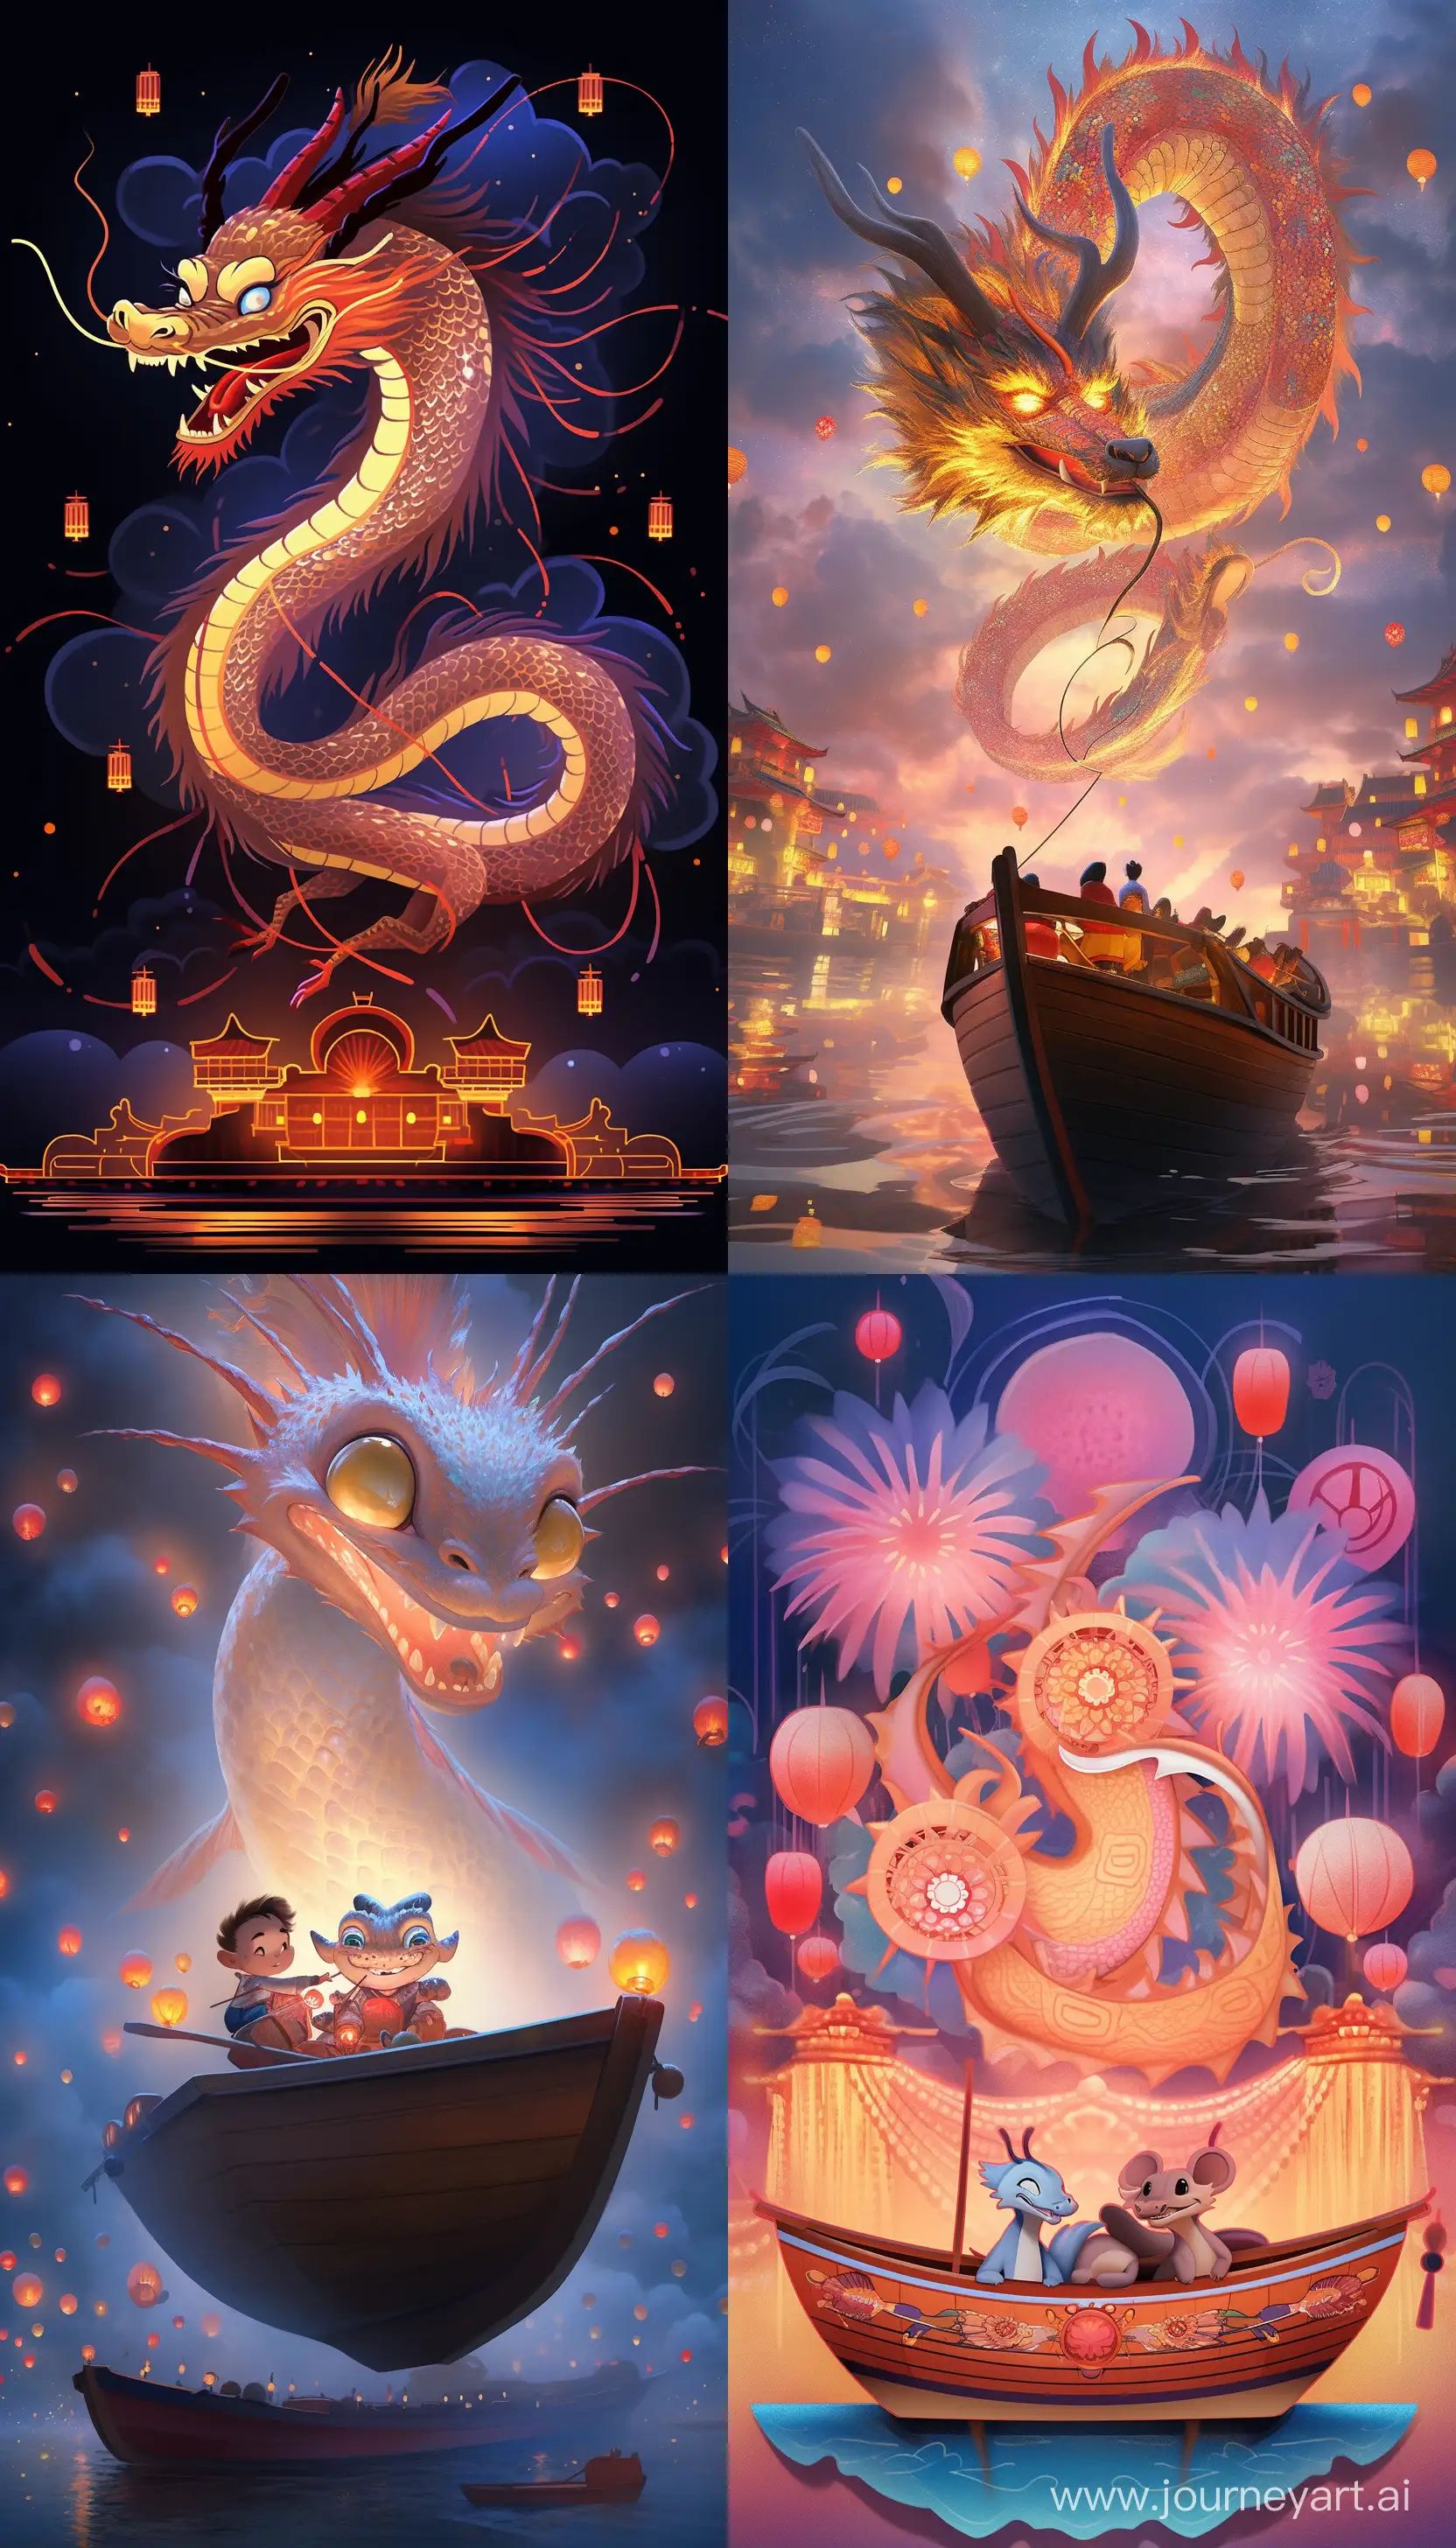 Celestial-Chinese-New-Year-Celebration-with-Dragons-and-Lanterns